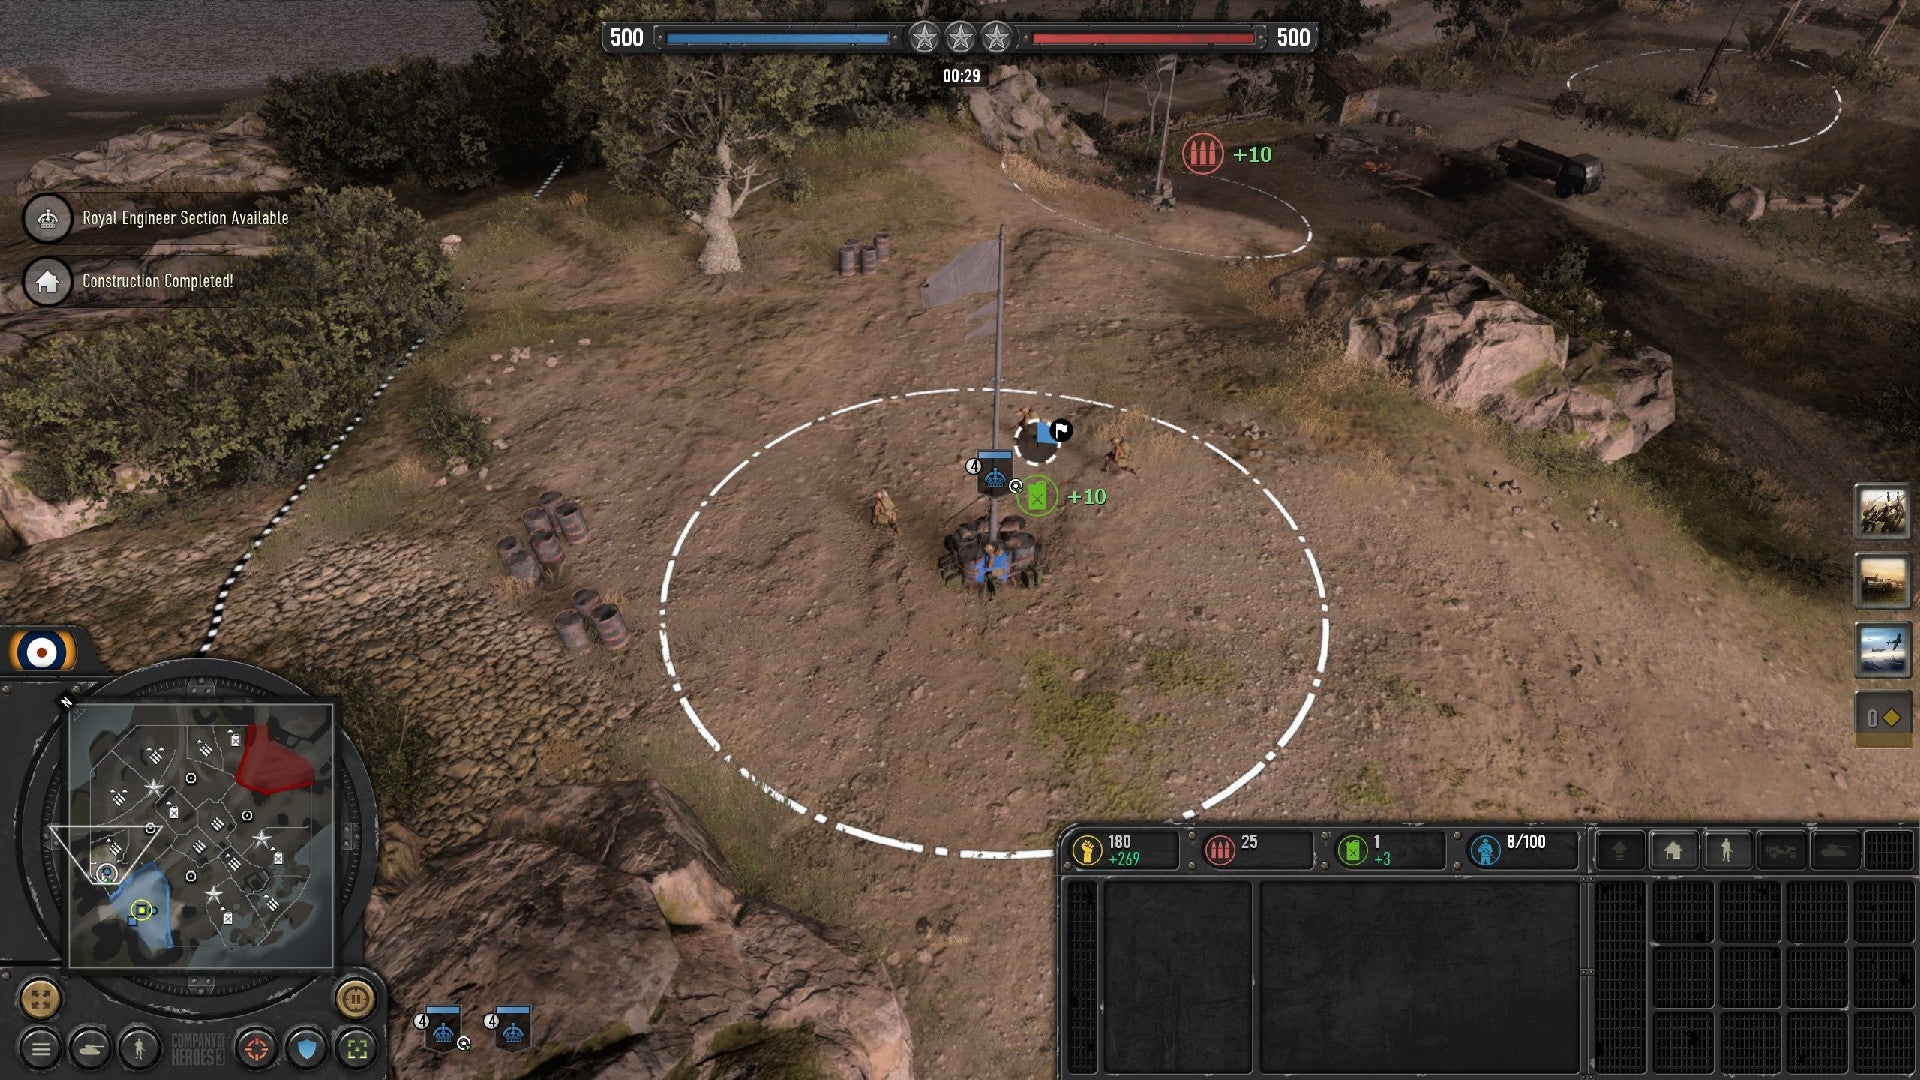 Company of Heroes 3 image showing an Engineer unit capturing a fuel point.